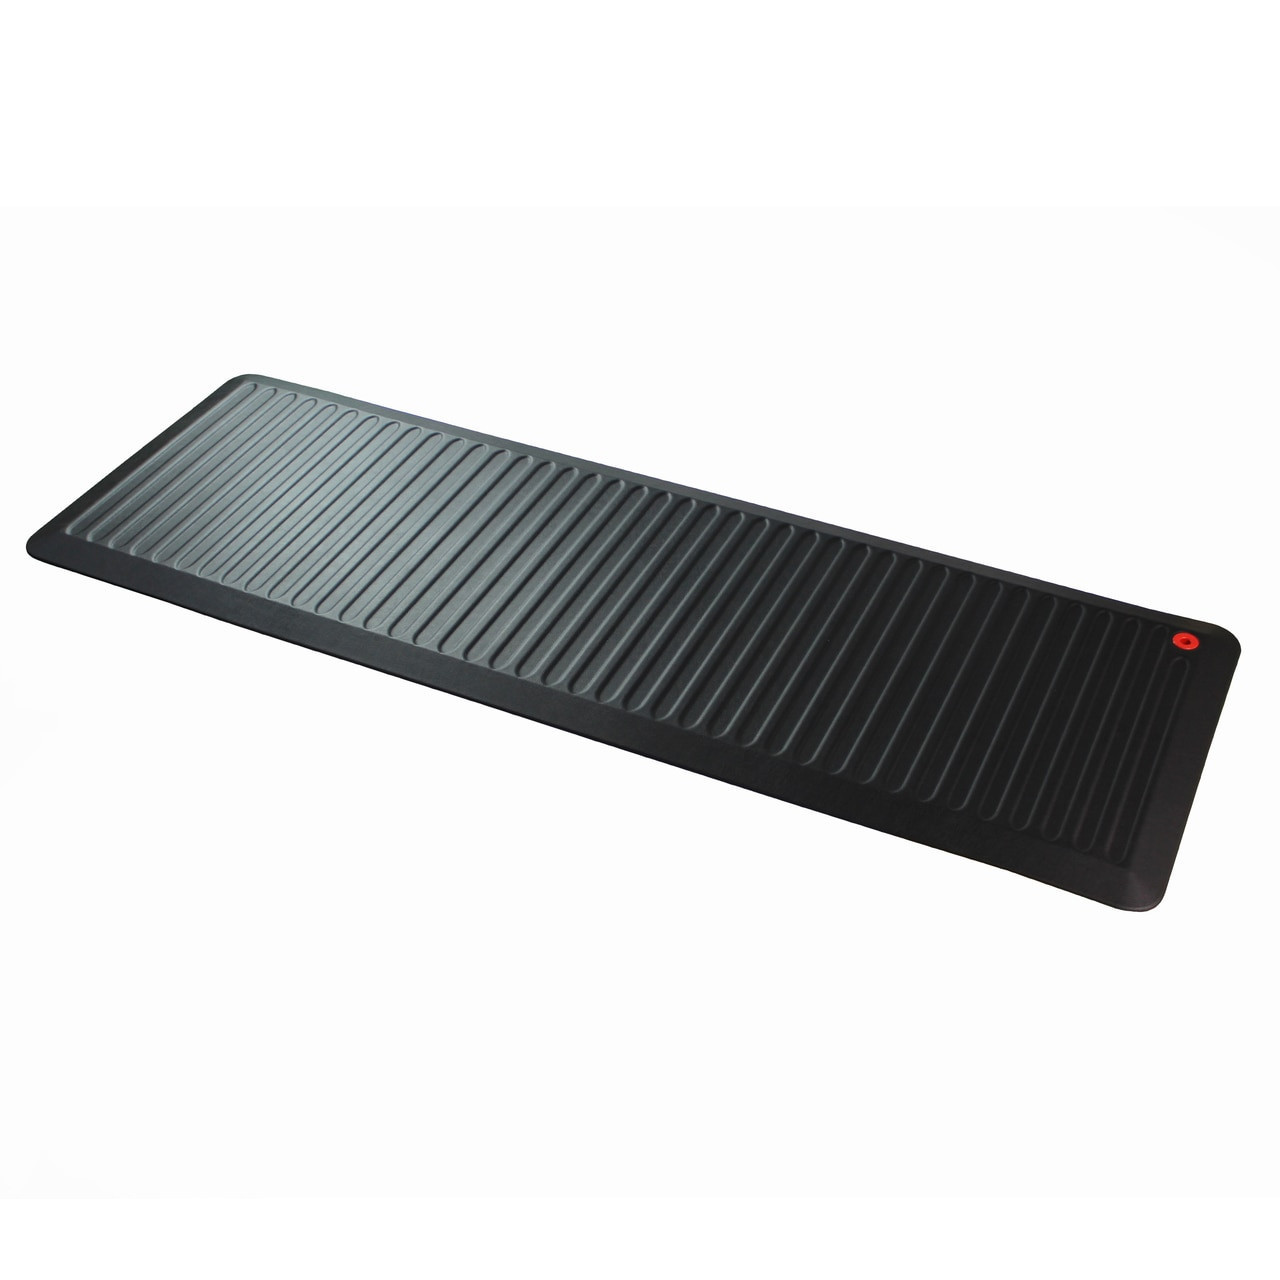 Stand Steady Anti-Fatigue Standing Mountain Mat